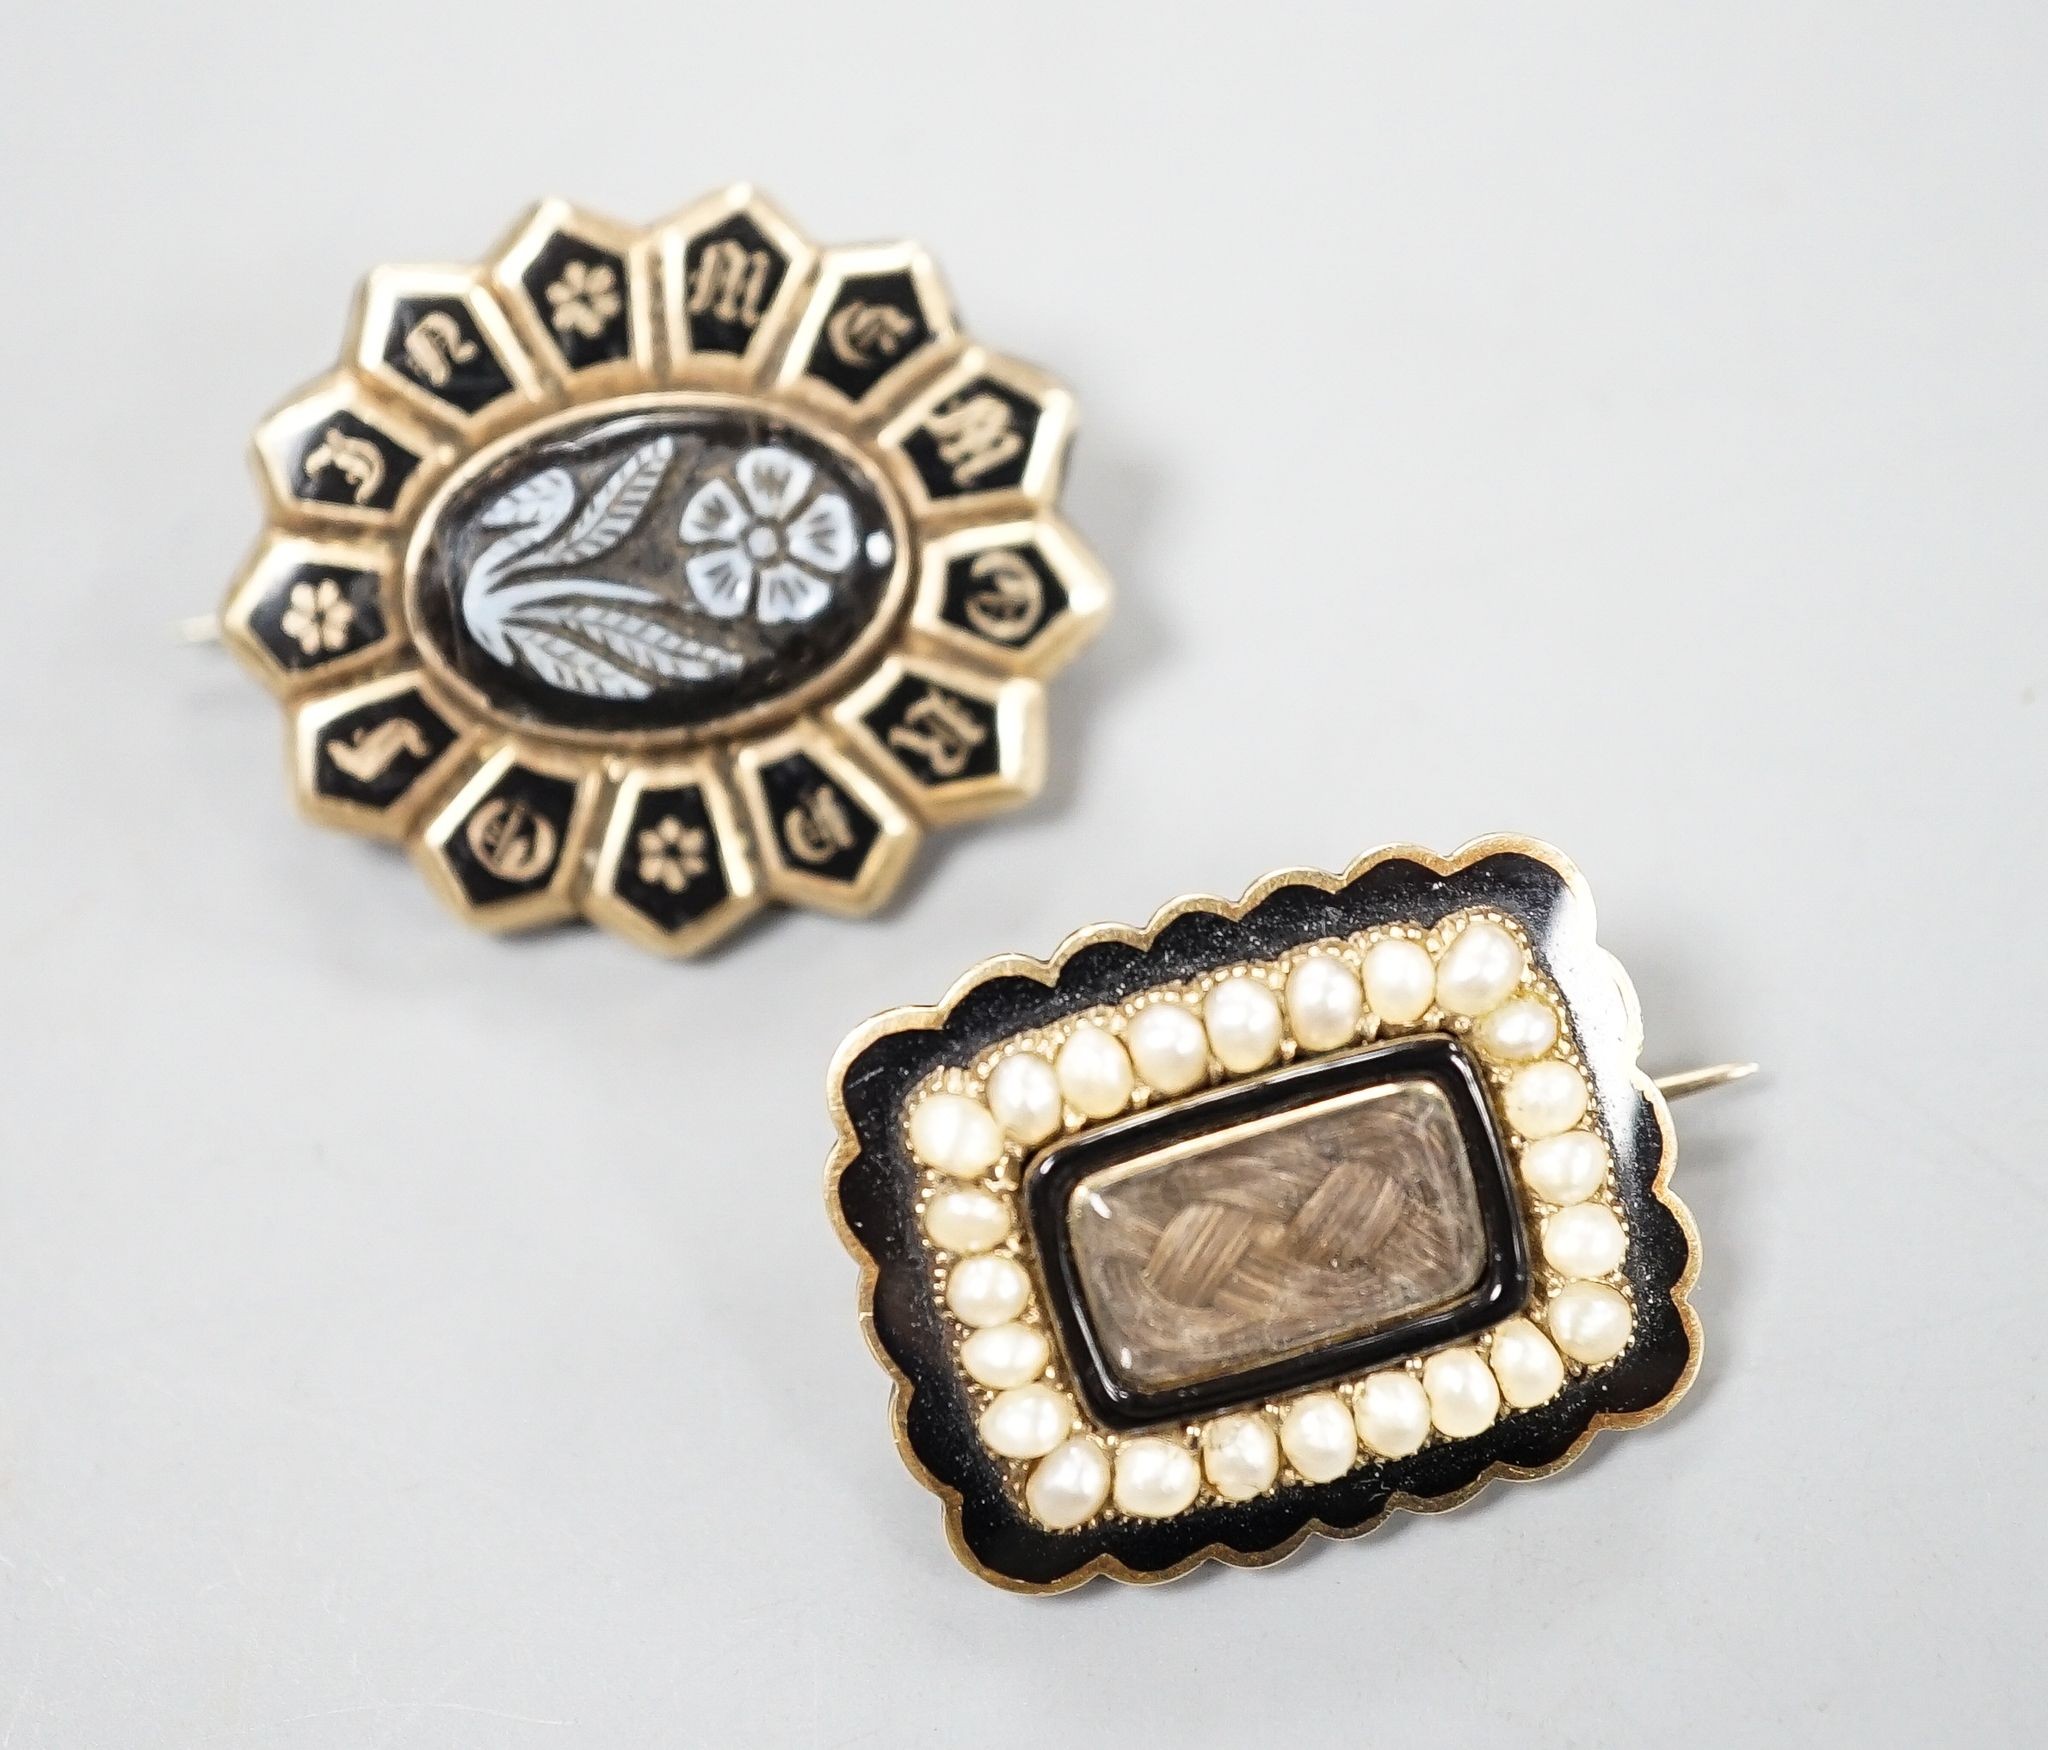 Two 19th century yellwo metal mourning brooches, one with plaited hair, split pearls and engraved inscripotion, the other with sardonyx centre stone, largest 27mm.